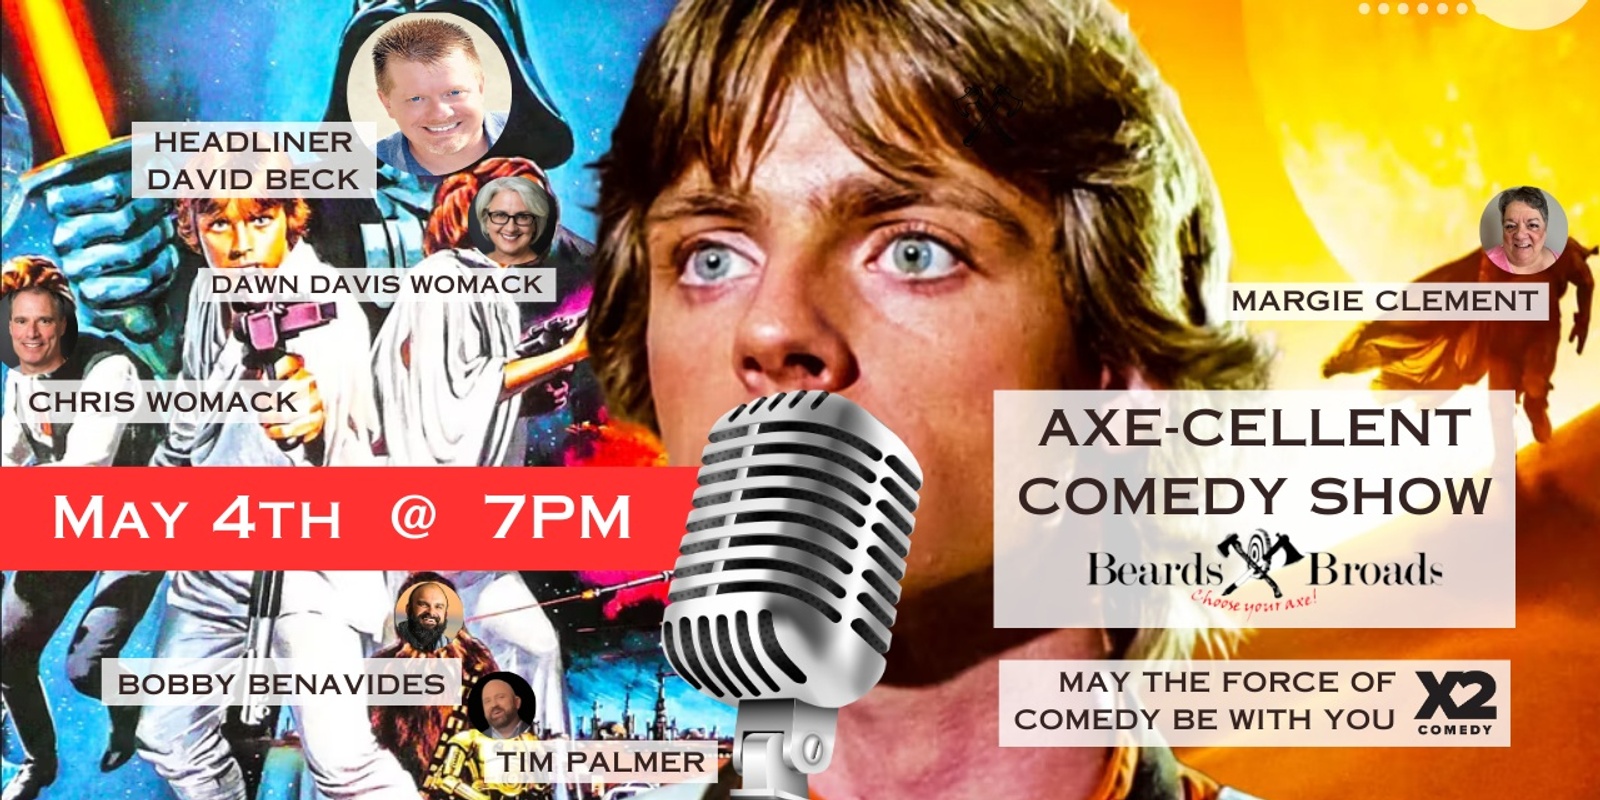 Banner image for Axe-cellent Comedy Show